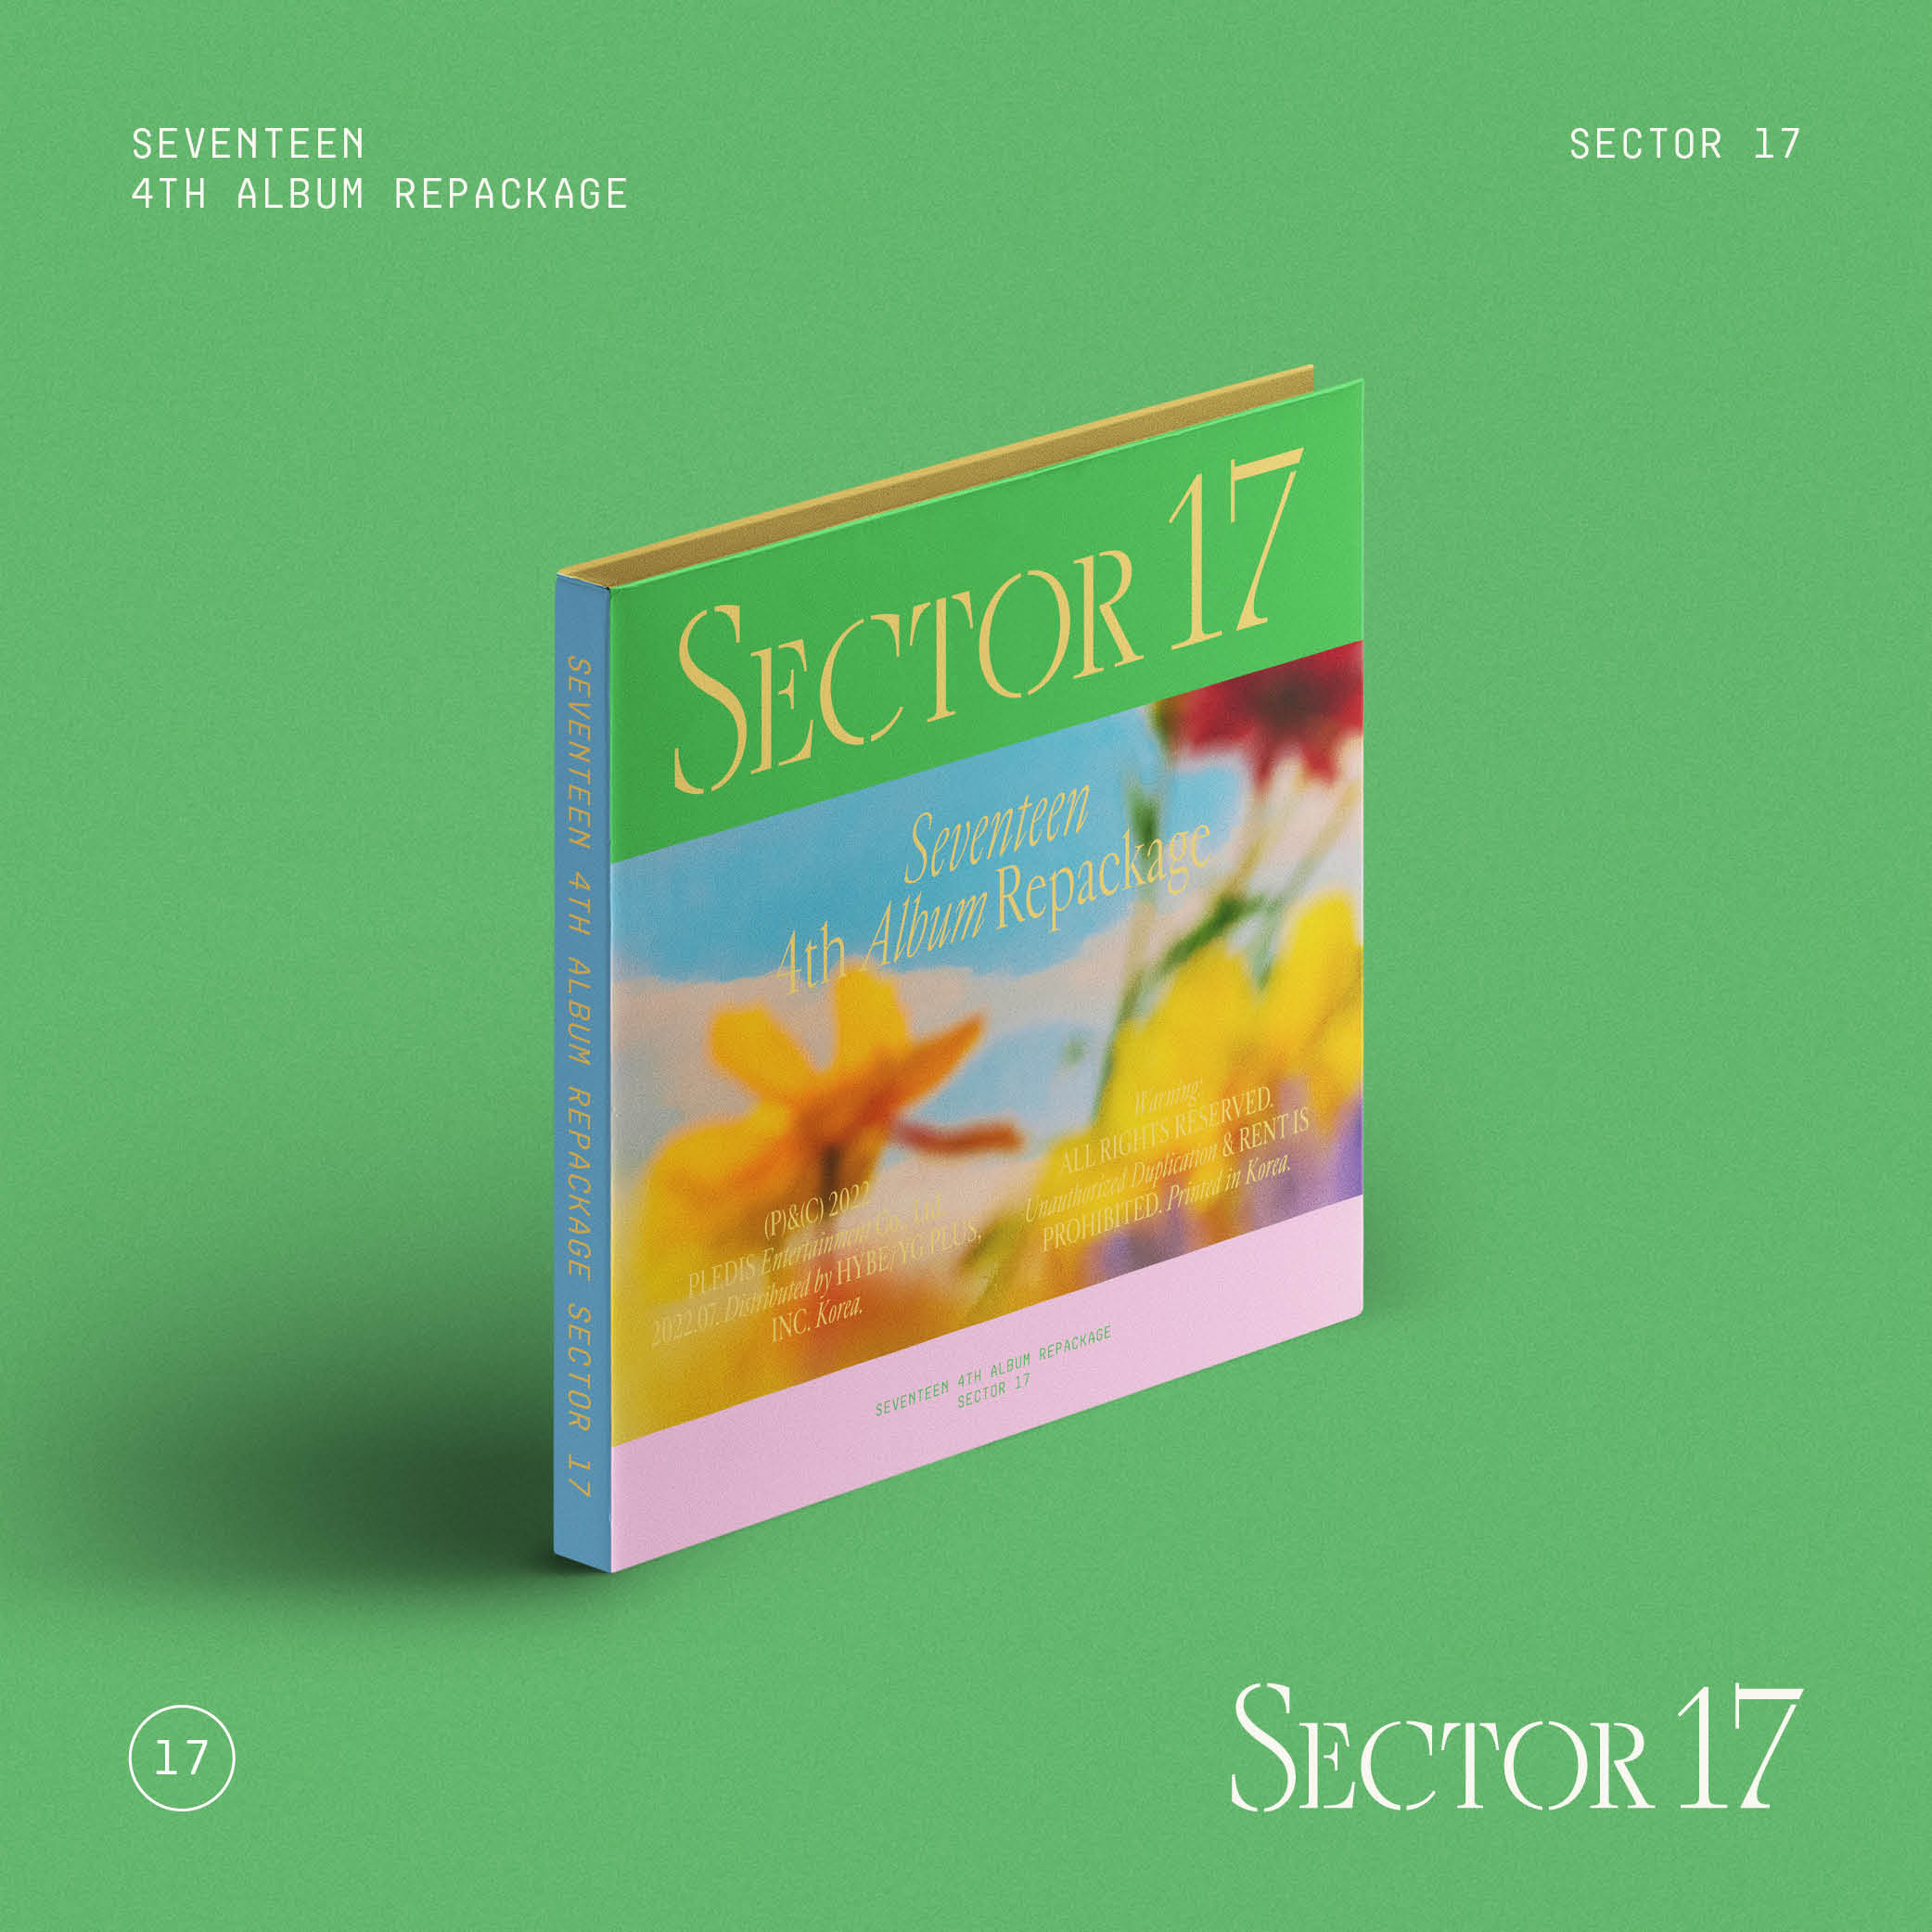 SEVENTEEN Sector 17 4th Album Repackaged COMPACT Version